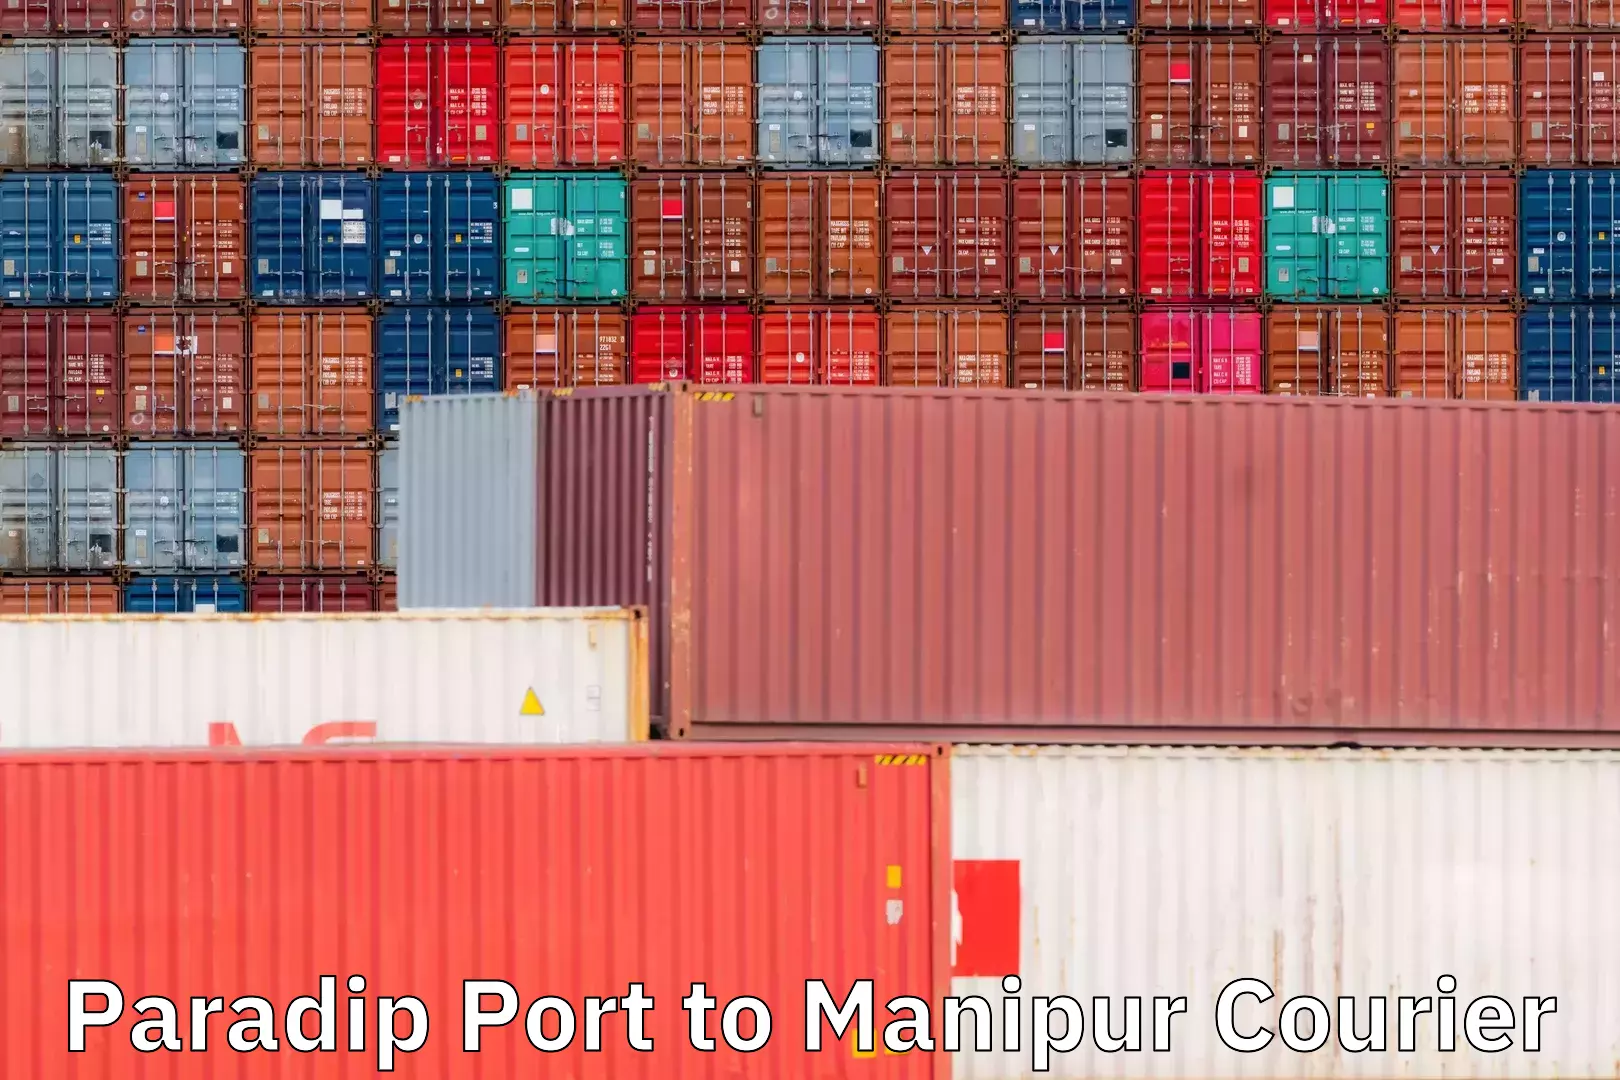 Ground shipping Paradip Port to Chandel